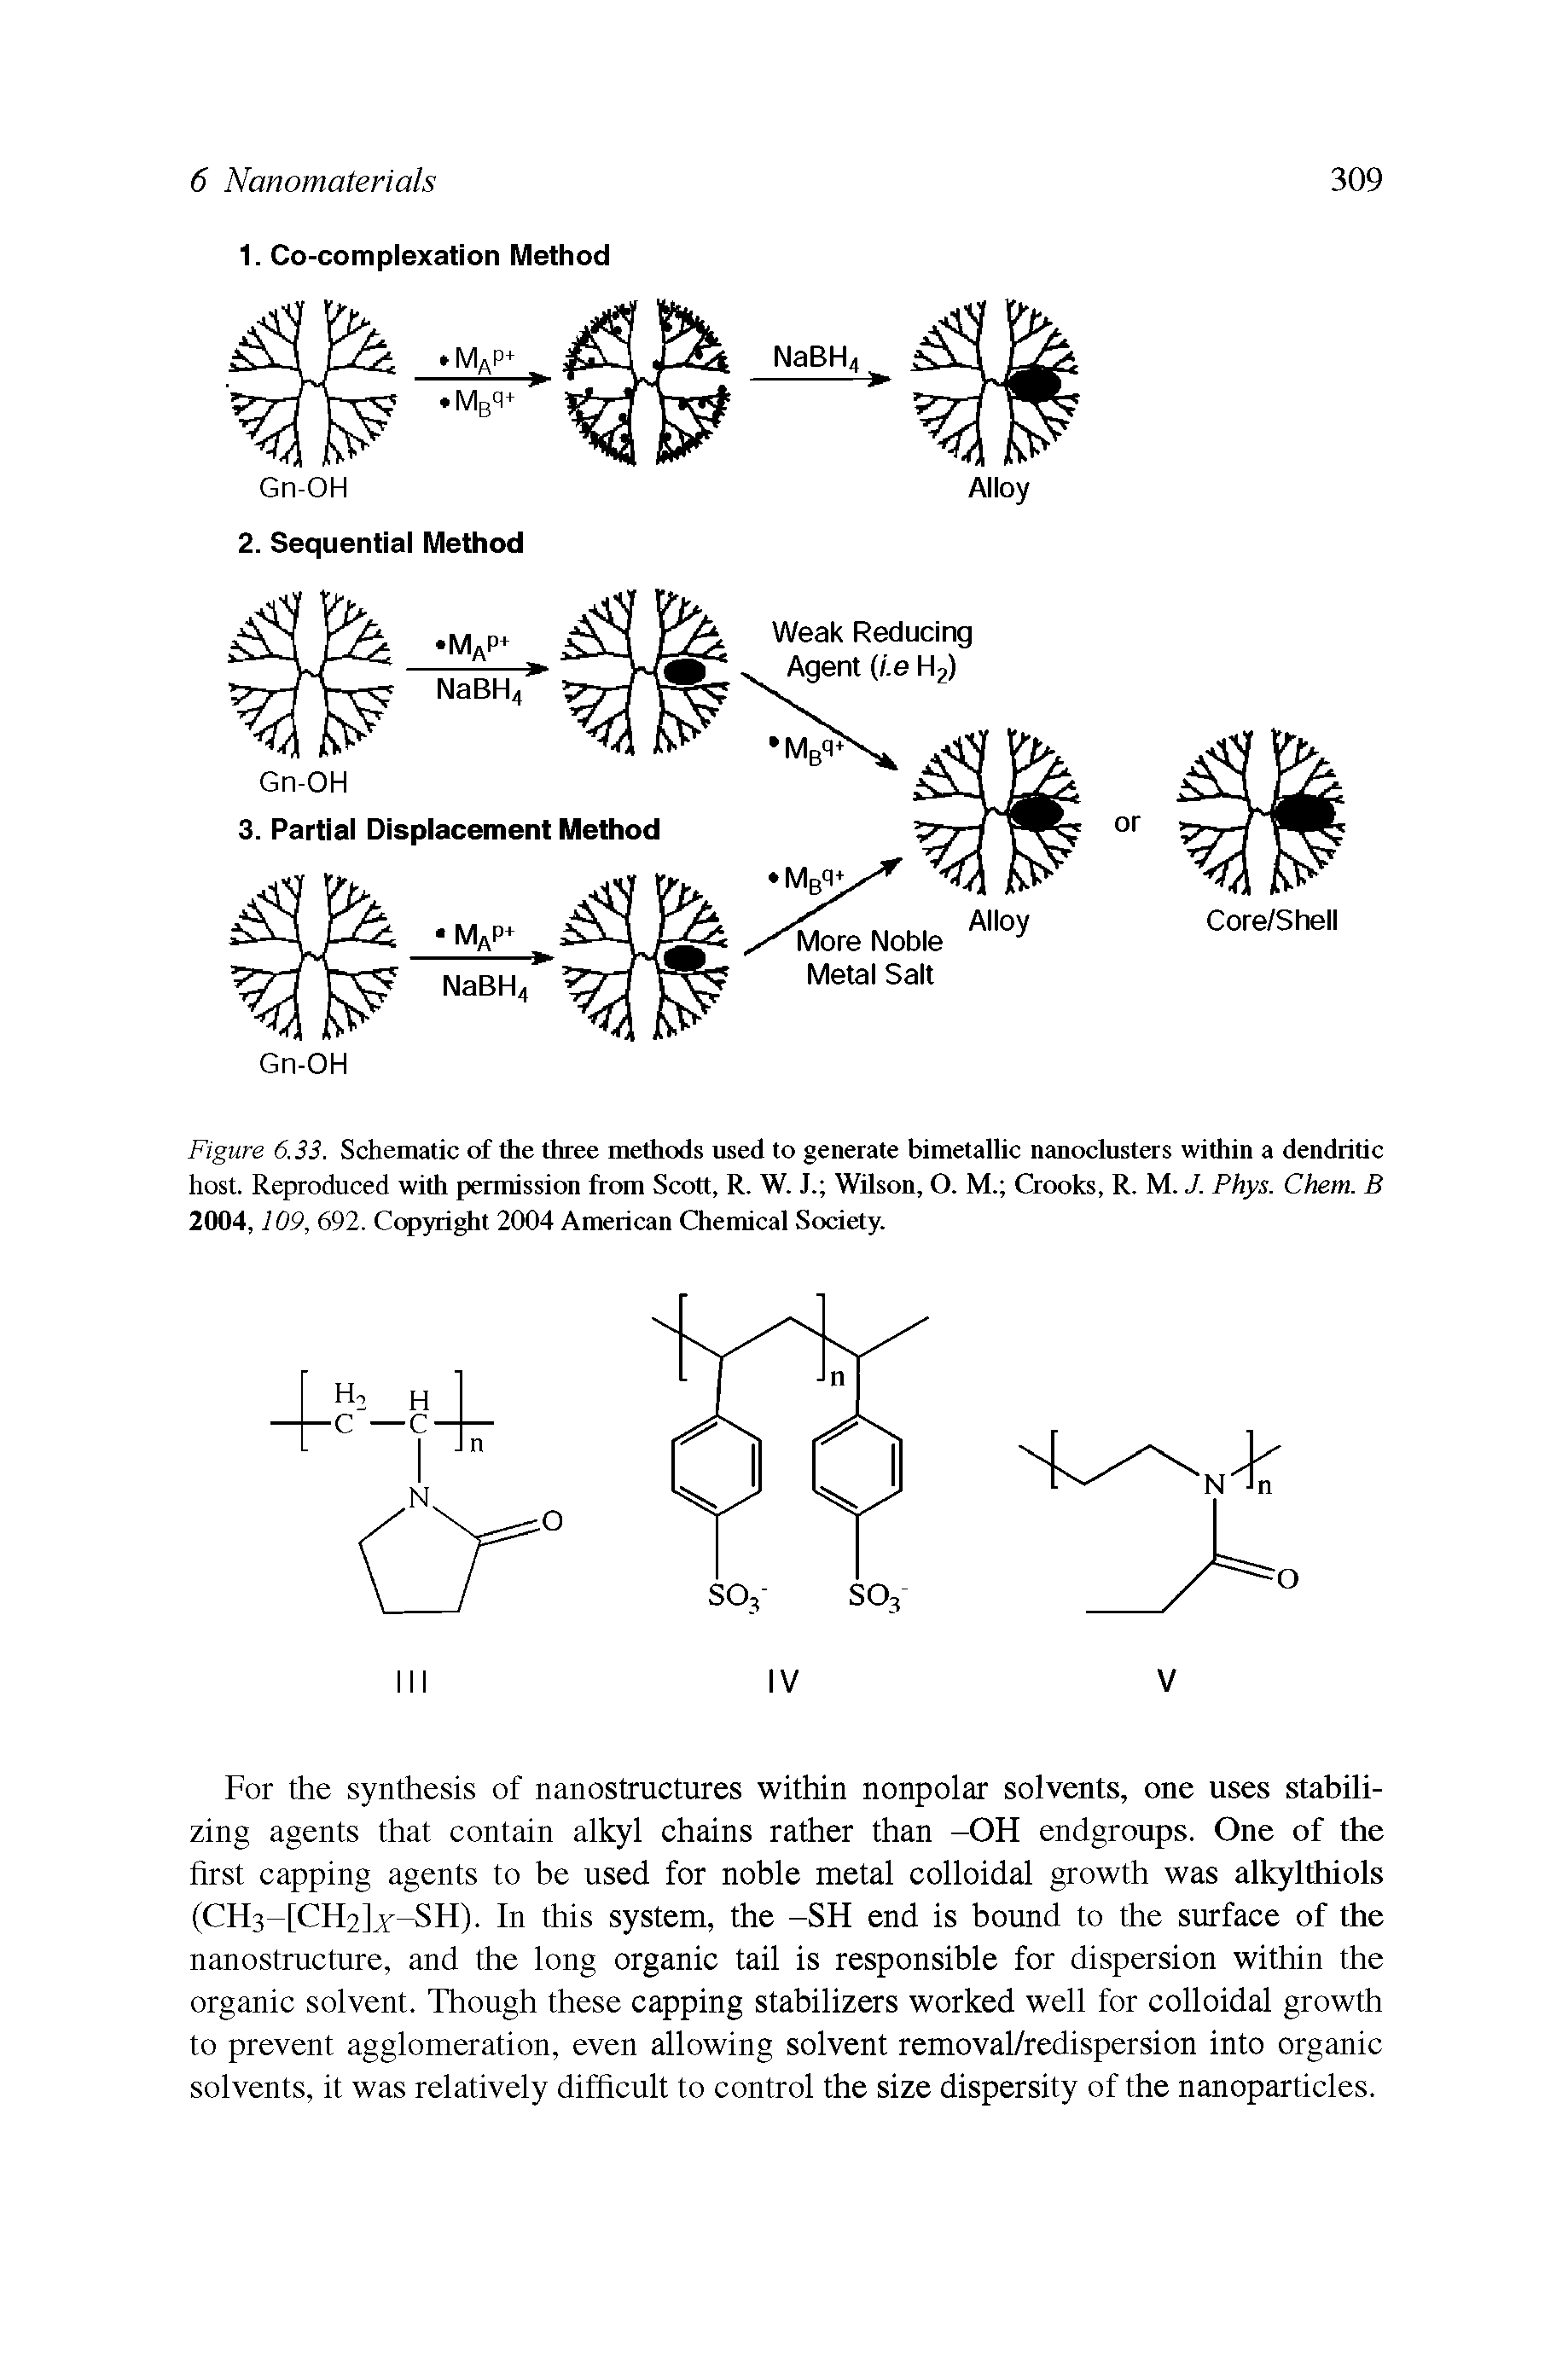 Figure 6.33. Schematic of the three methods used to generate bimetallic nanoclusters within a dendritic host. Reproduced with permission from Scott, R. W. J. Wilson, O. M. Crooks, R. M. J. Phys. Chem. B 2004,109, 692. Copyright 2004 American Chemical Society.